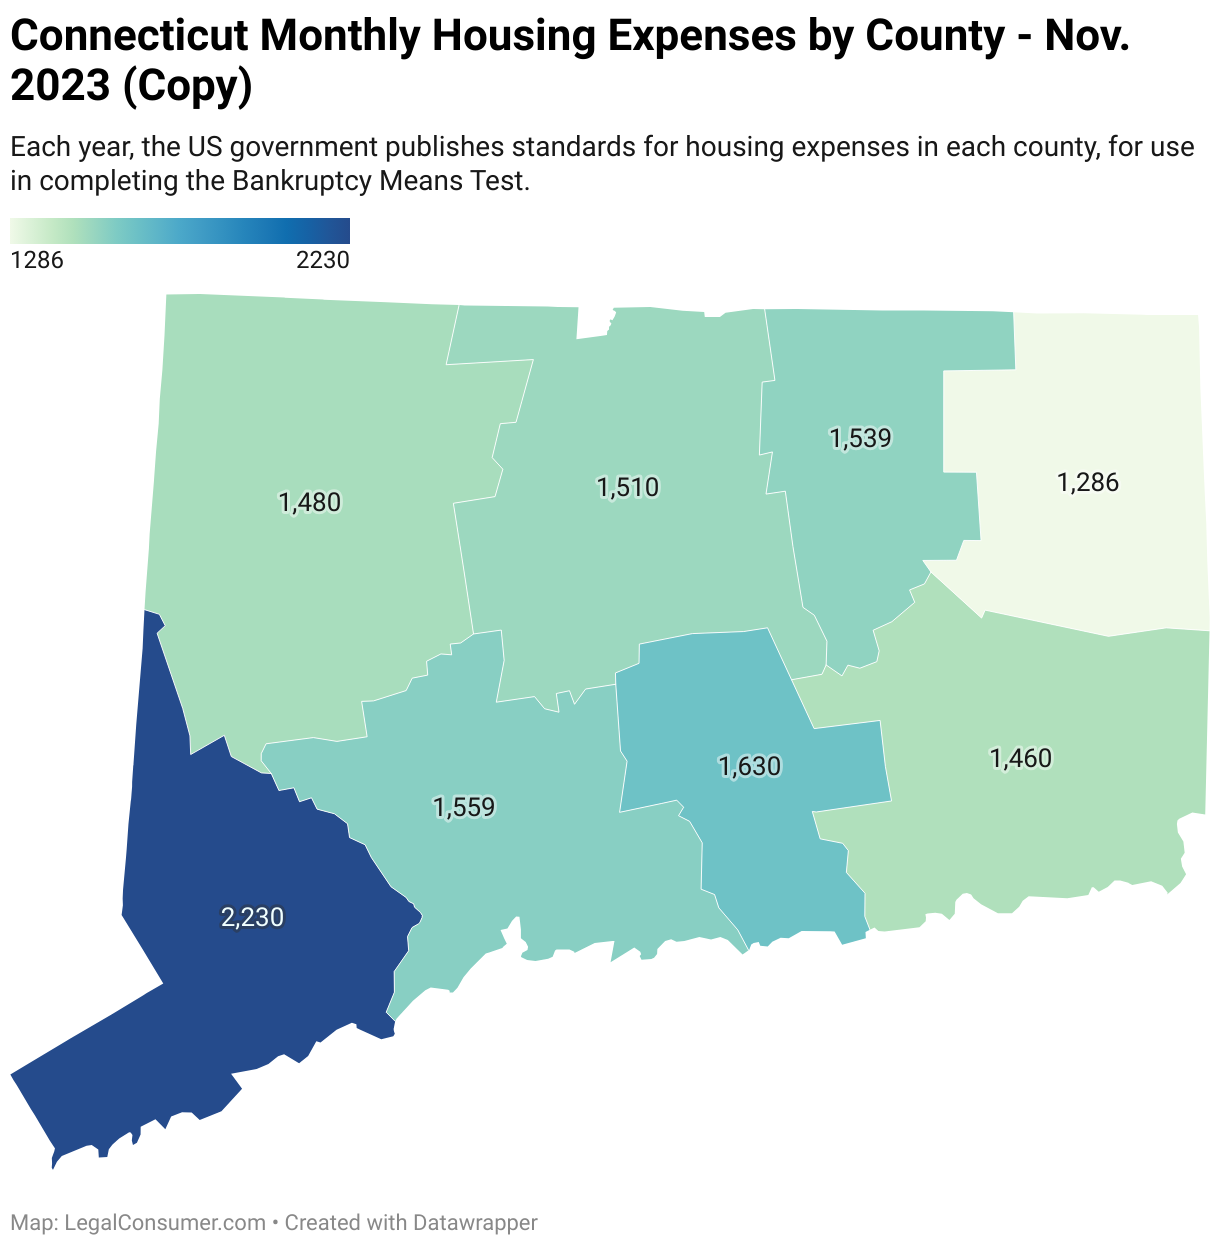 Map of Connecticut Housing Expenses for Bankruptcy Means Test